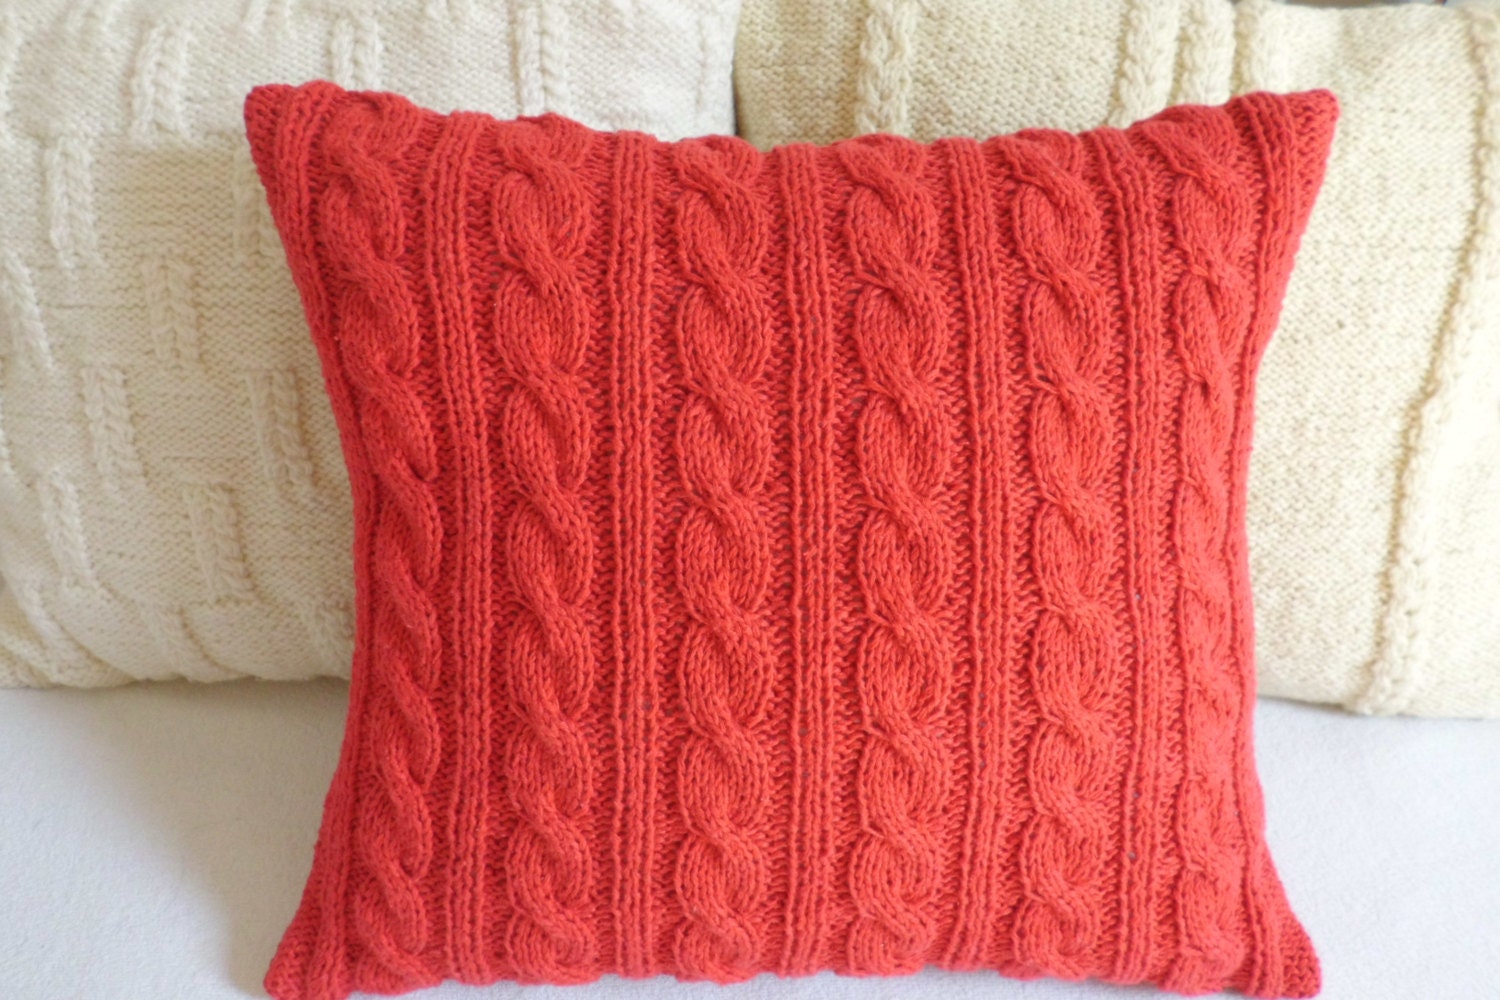 Hand knit burgundy-red cushion, cable knit pillowcase, 100% cotton knitted decorative couch 14x14 throw pillow, toss pillow - Adorablewares